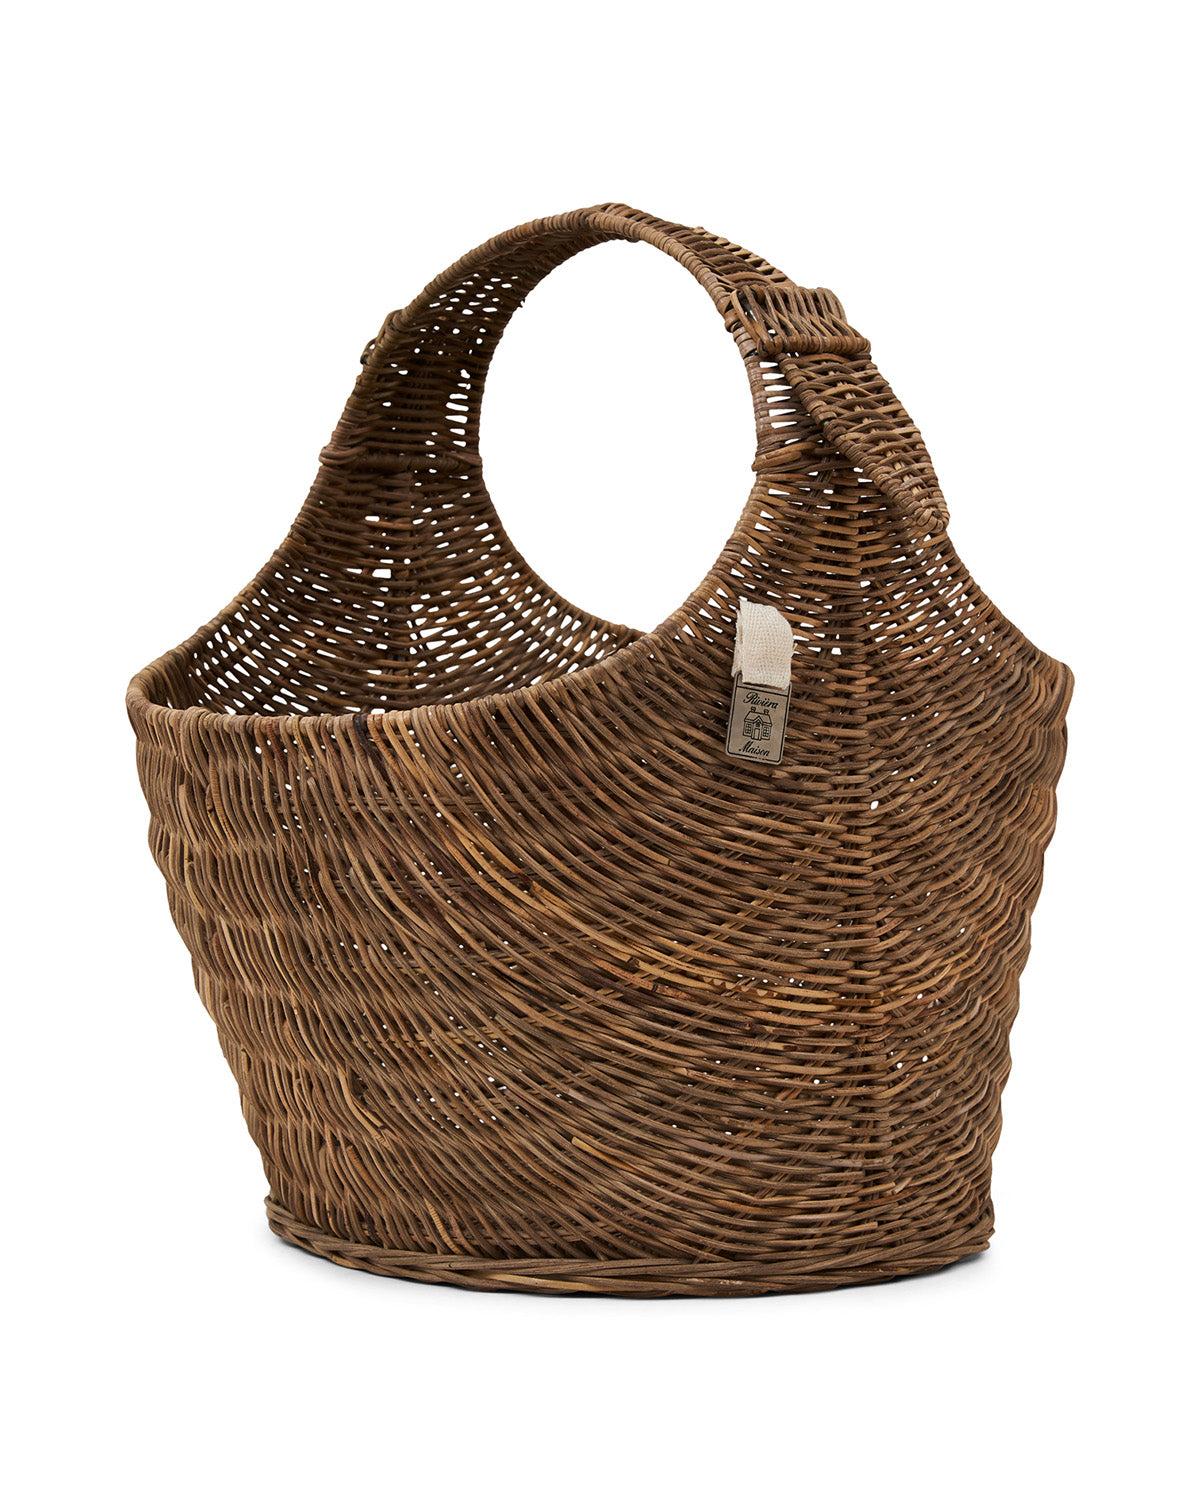 MAGAZINE BASKET made of rattan in the shape of a bag by Riviera Maison